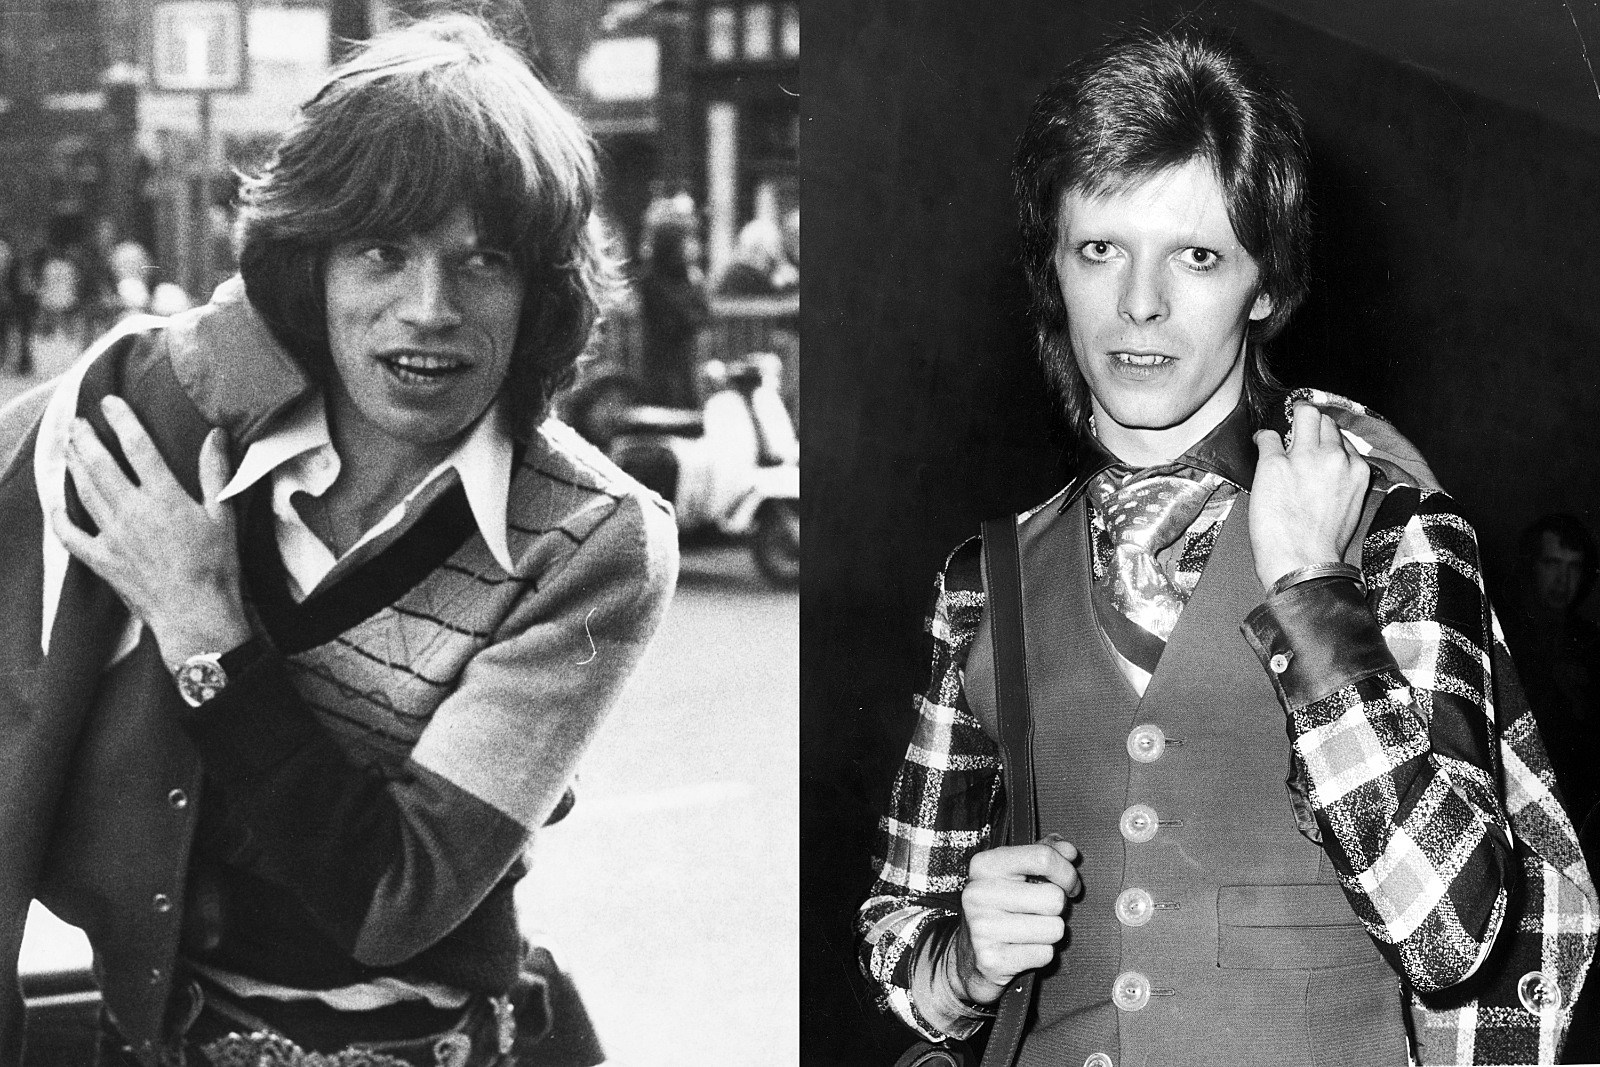 Why Stones’ ‘Angie’ Was Rumored to Be About Jagger-Bowie Tryst